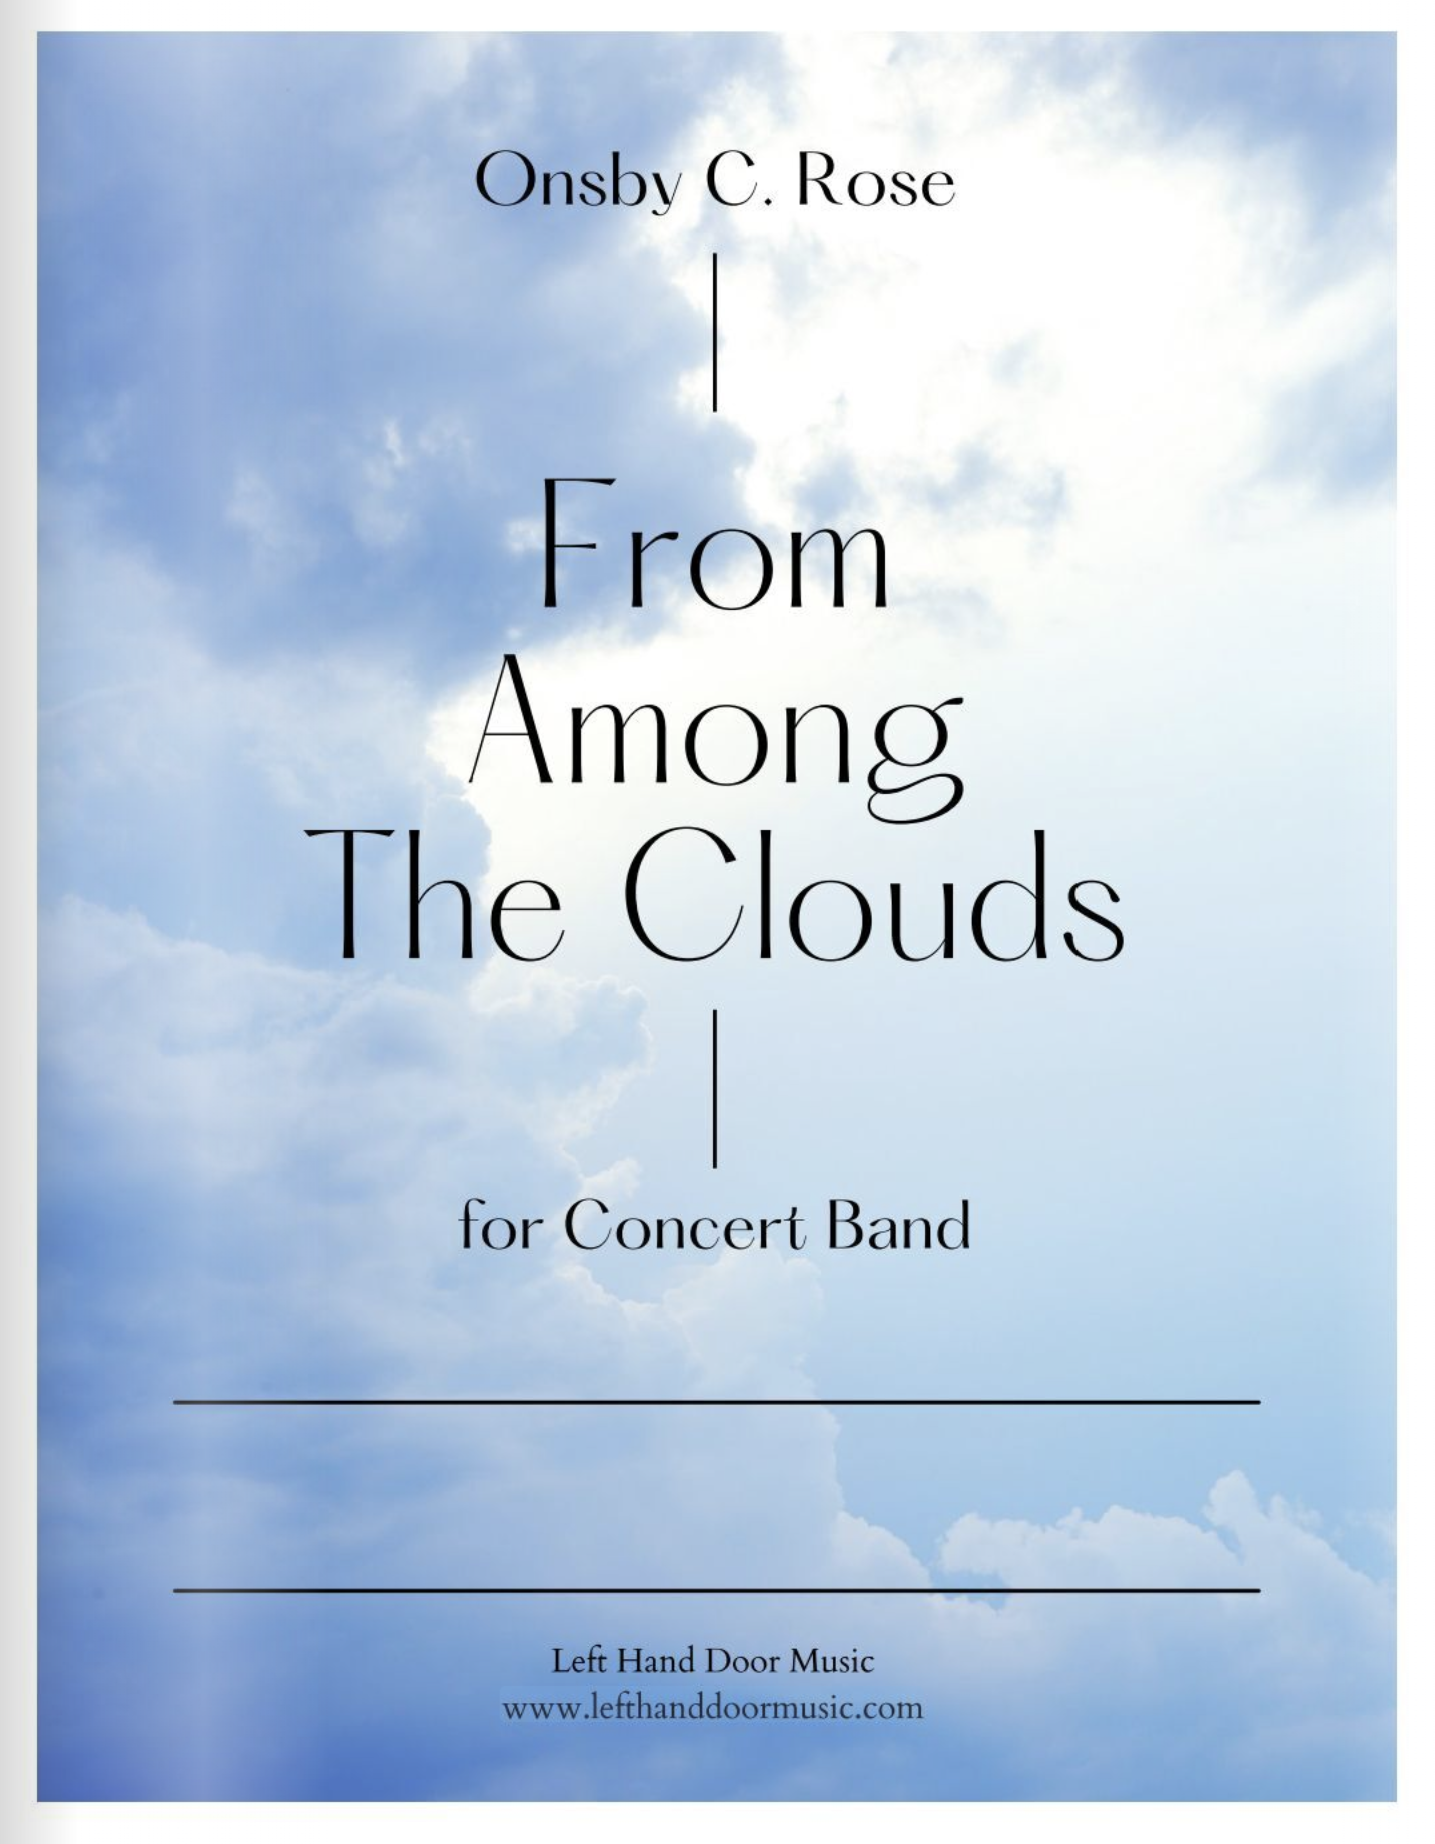 From Among The Clouds (Score Only) by Onsby C. Rose